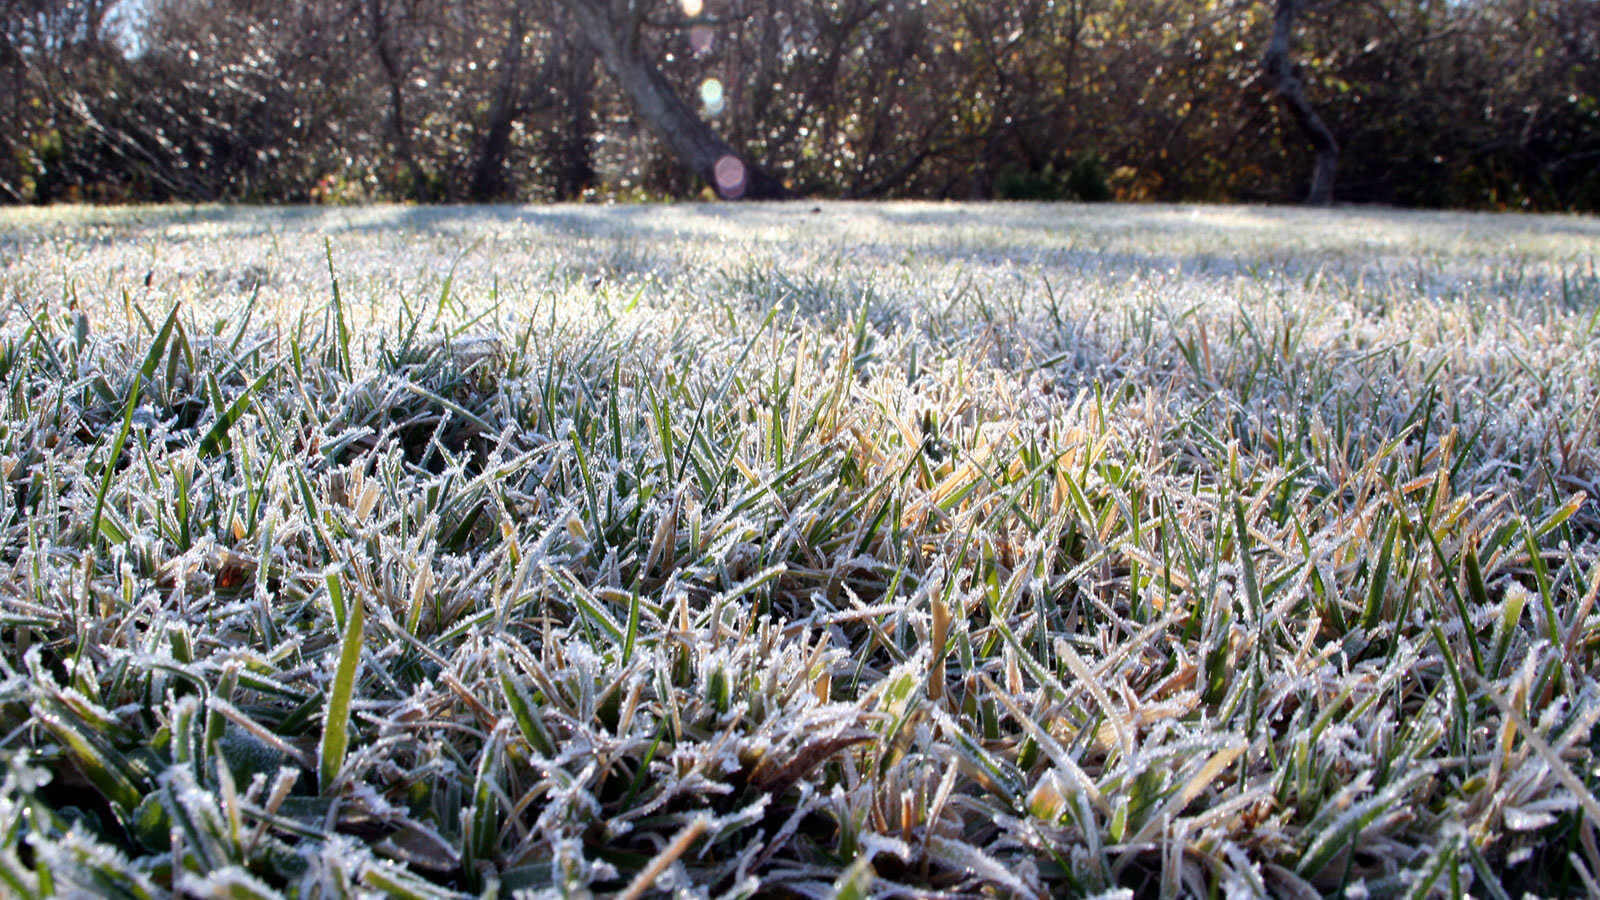 How Cold Is Too Cold To Plant Grass Seed